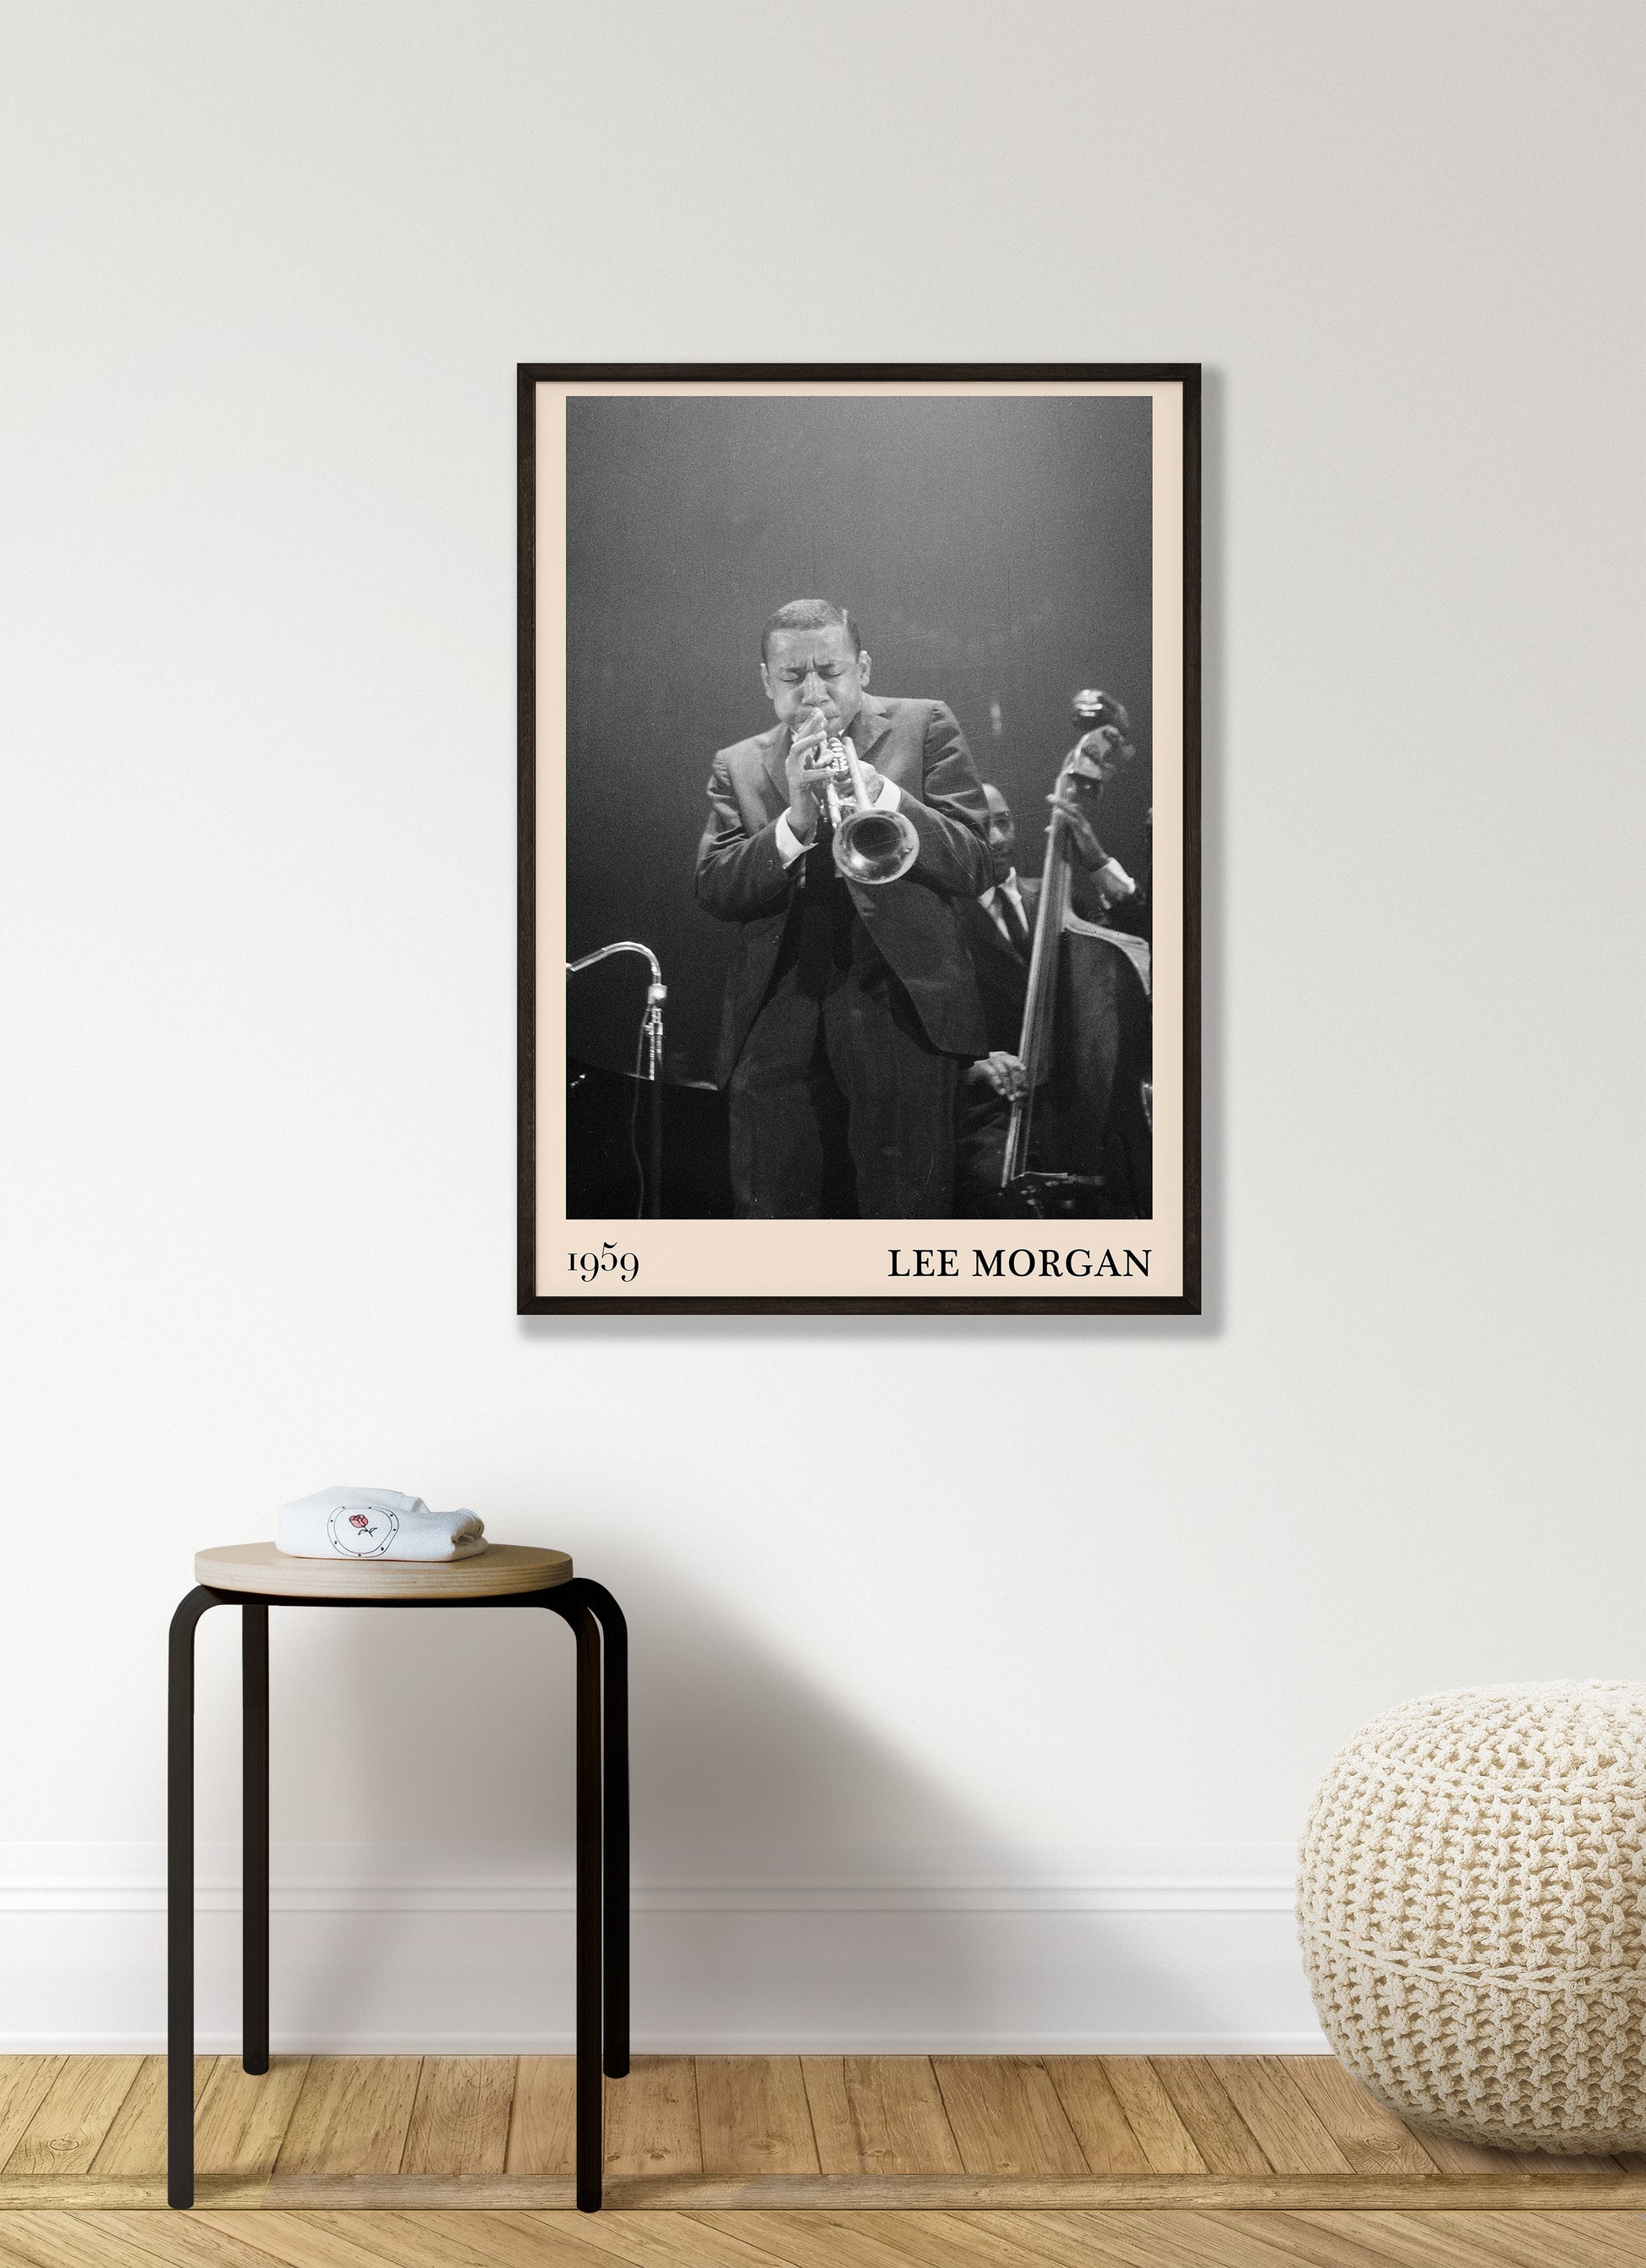 1959 photograph of Lee Morgan playing the Trumpet transformed into a stylish black-framed jazz print hanging on a white living room wall